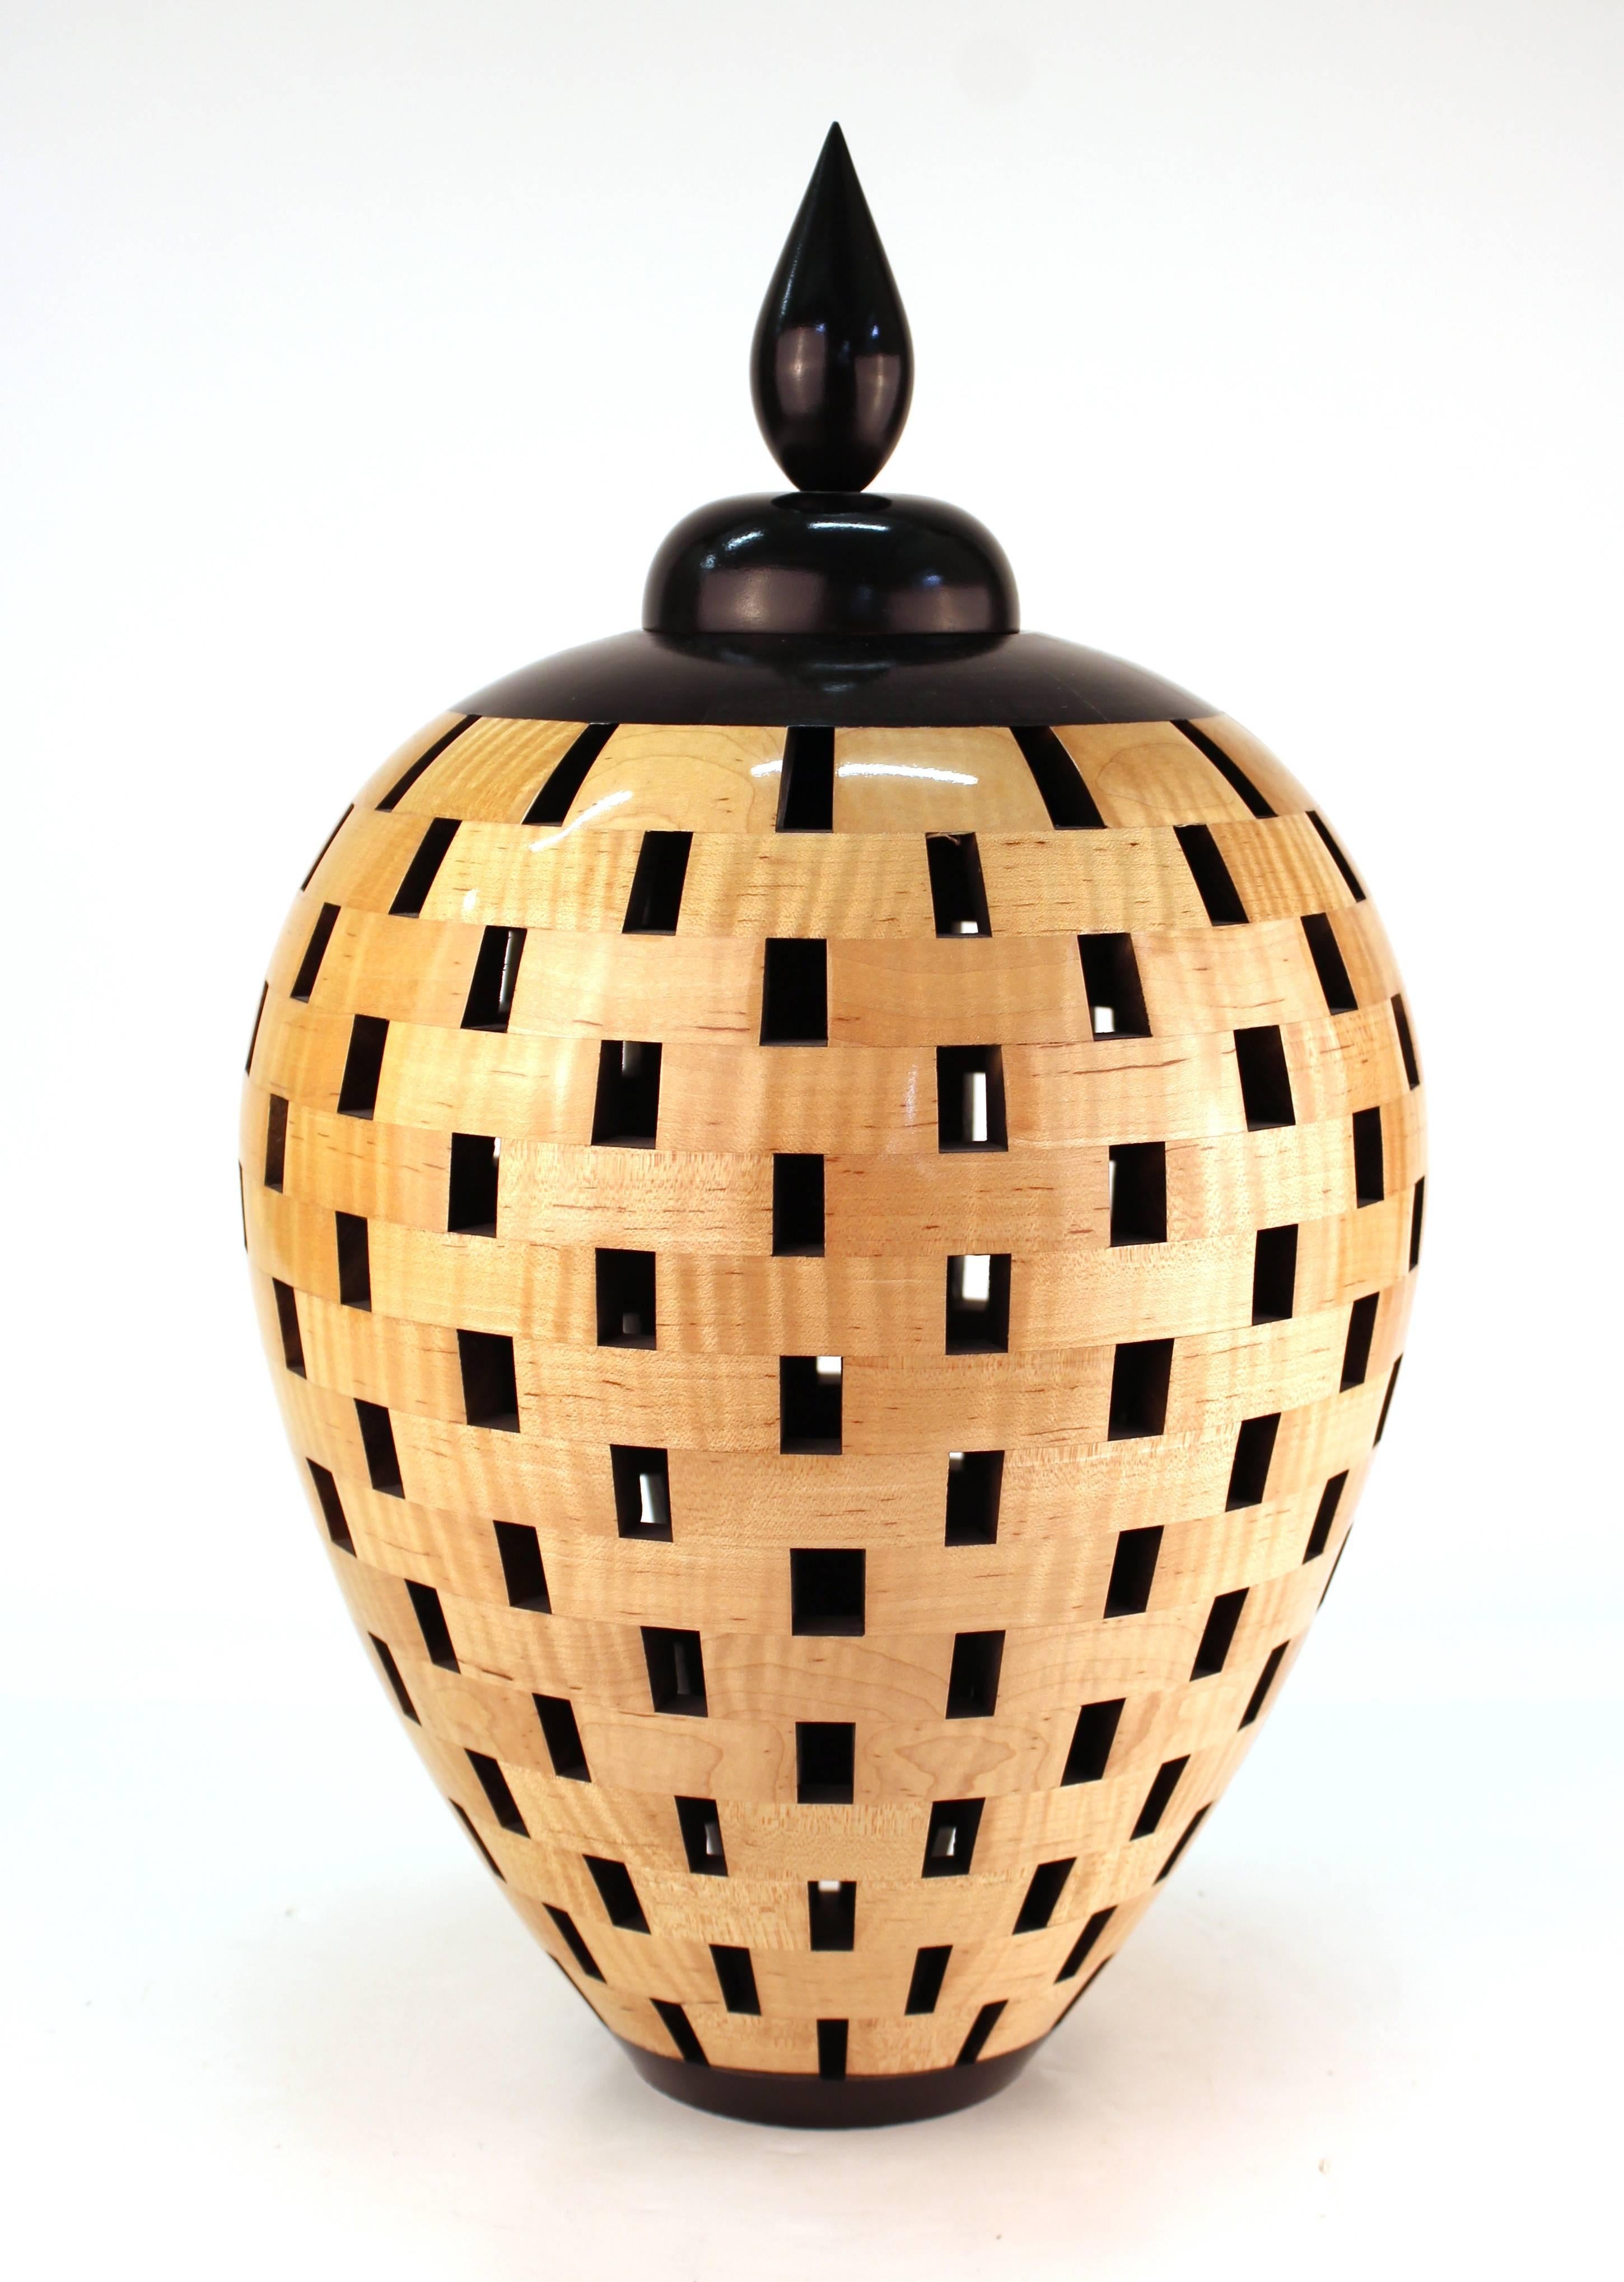 A wooden lacquered vessel with lid, created by Joel Hunnicutt. The vessel has open segments, which is representative of Hunnicutt's creative style. The piece is in great condition.